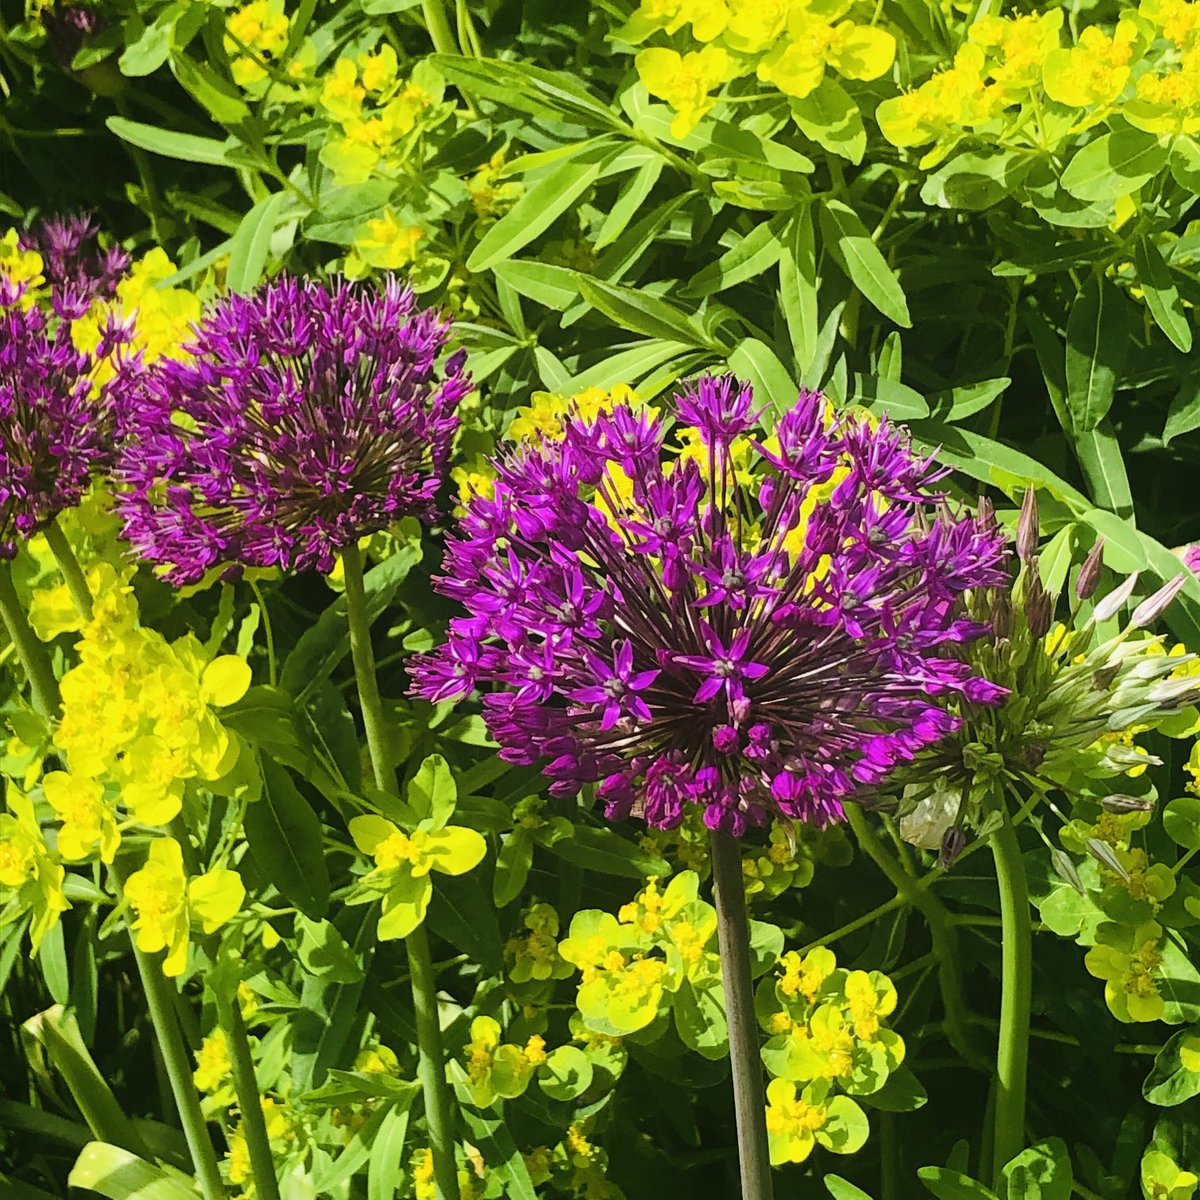 Alliums & Euphorbia seen on a recent walk 💜💚 Have a great day.